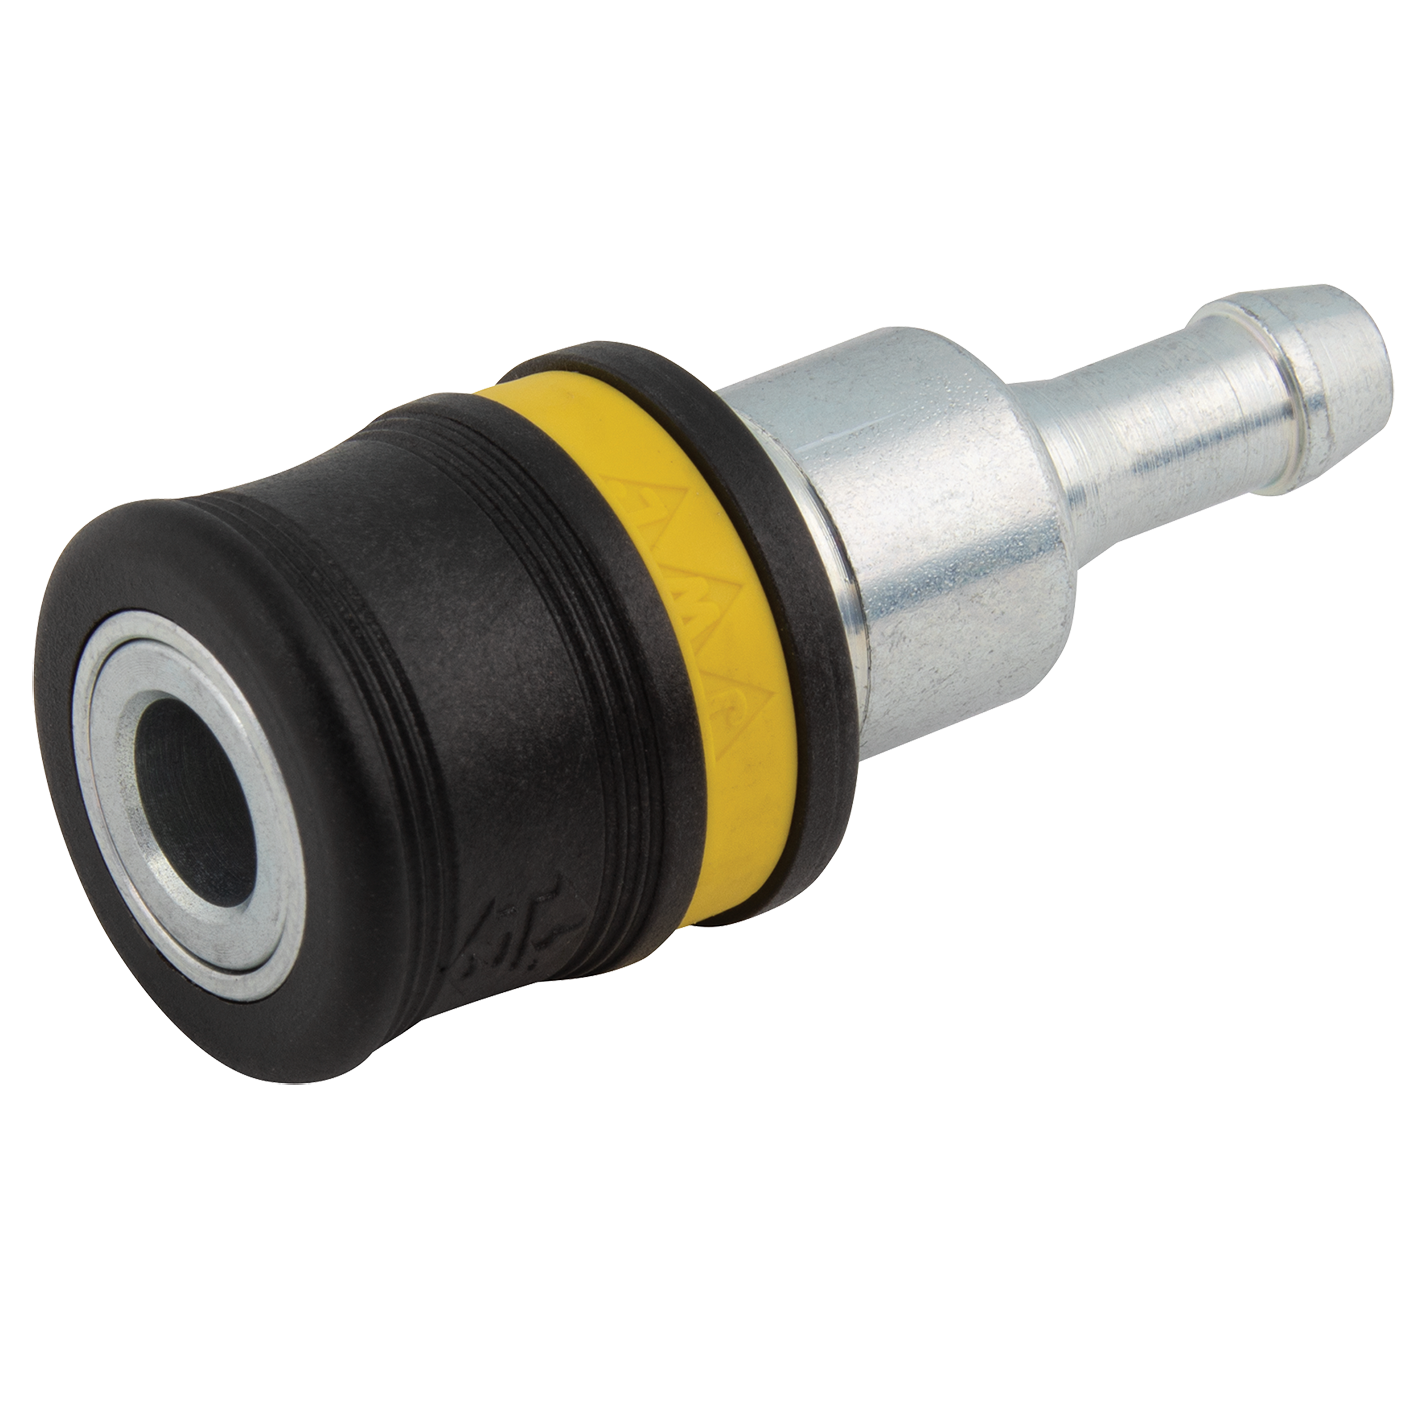 13MM HOSE TAIL ORION 572 SAFETY COUPLING